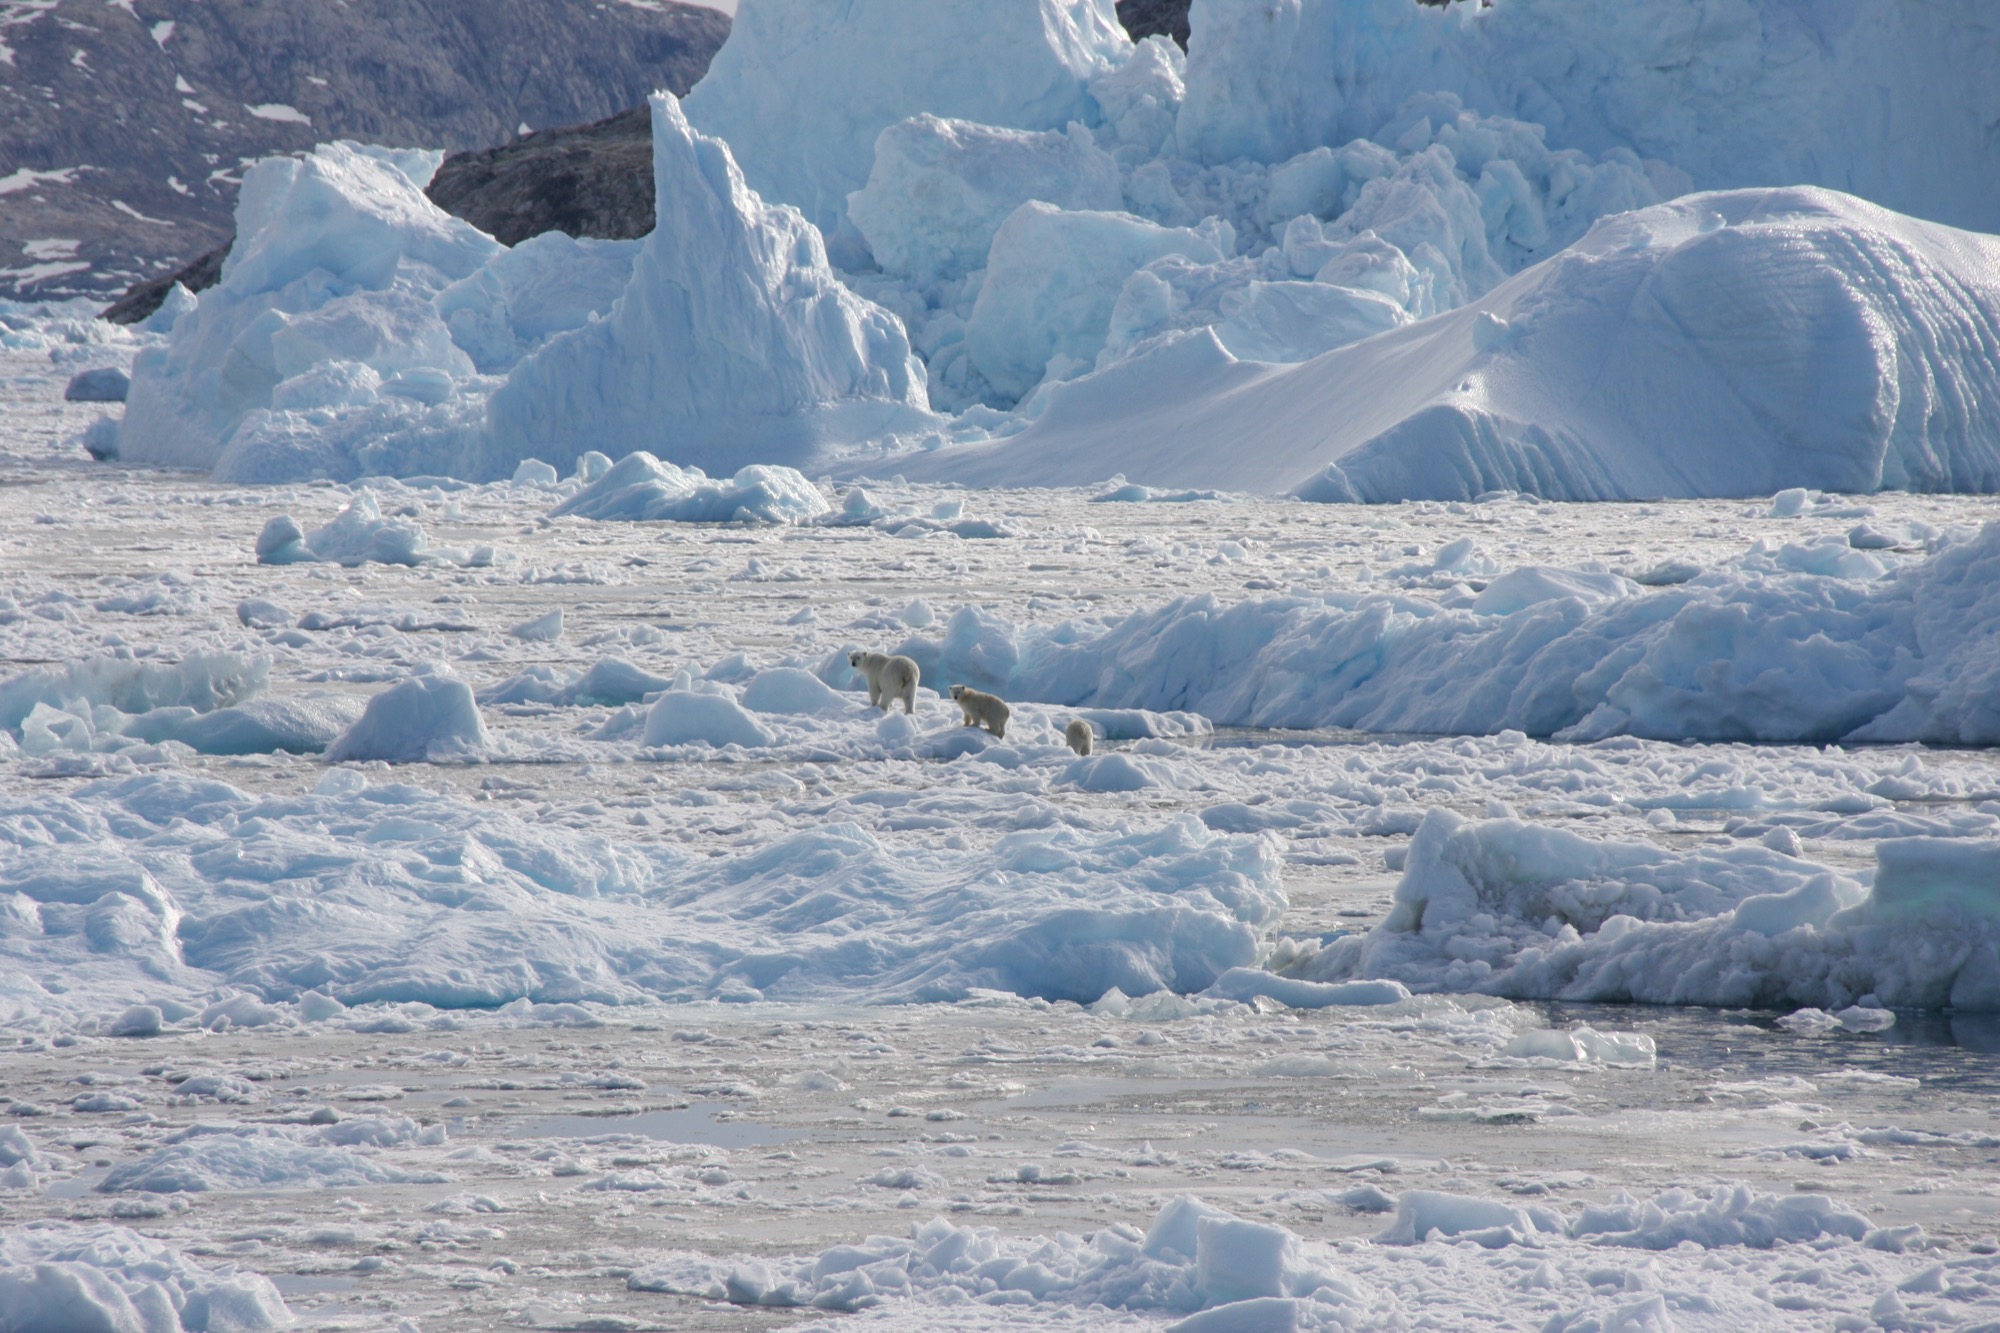 Greenland’s polar bears are learning to get around in a less icy world